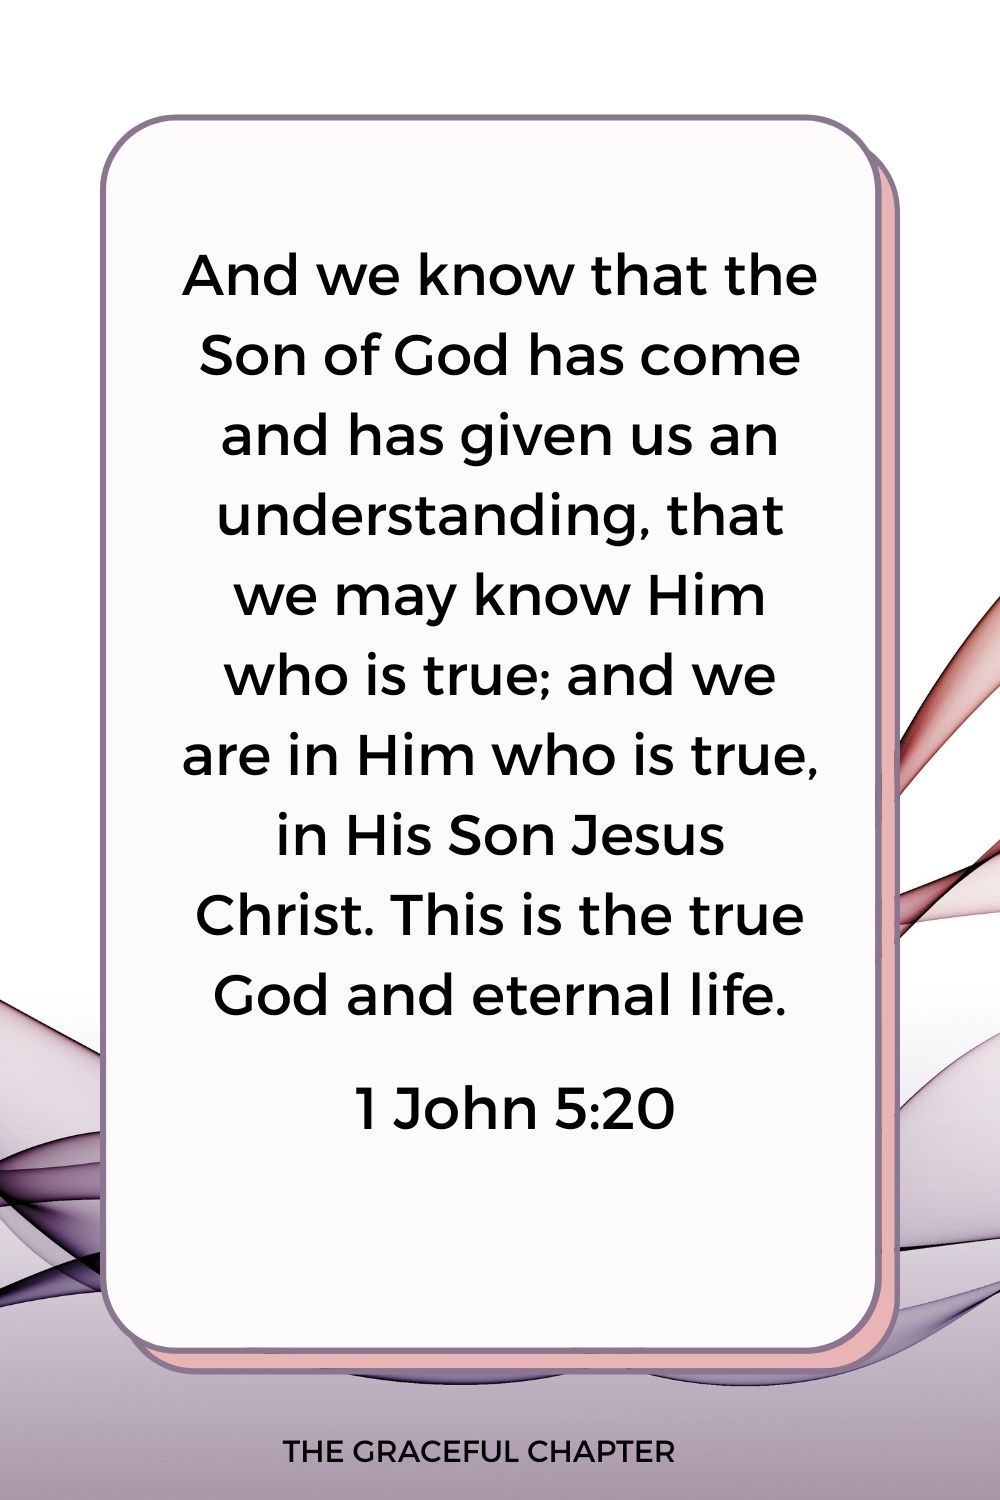 And we know that the Son of God has come and has given us an understanding, that we may know Him who is true; and we are in Him who is true, in His Son Jesus Christ. This is the true God and eternal life.